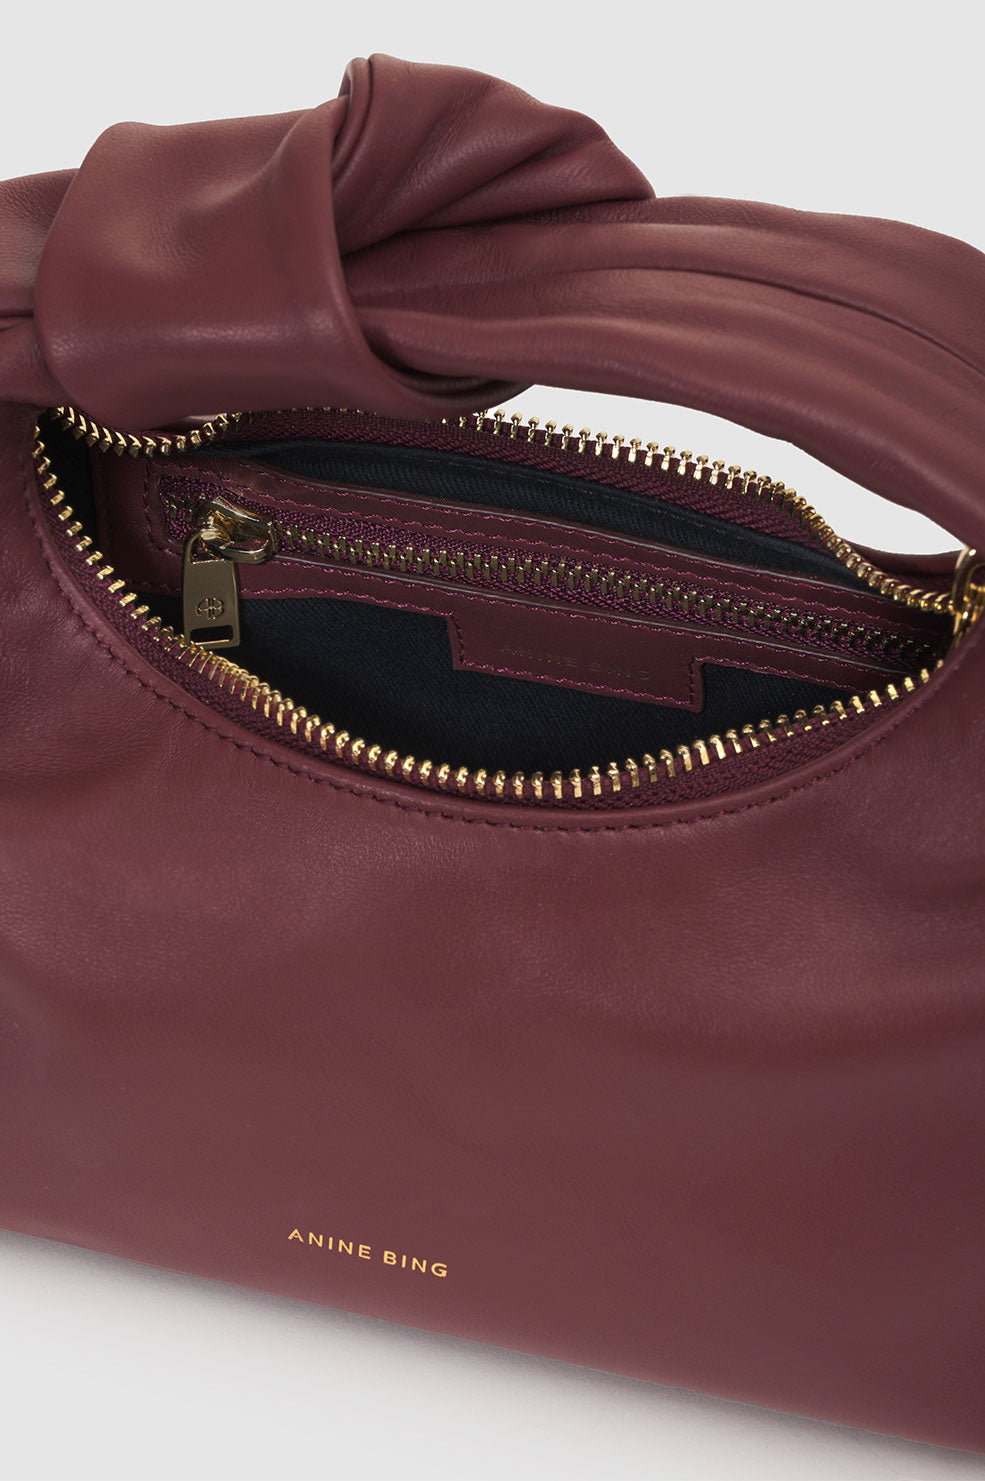 Mini Grace Bag - Dark Cherry by ANINE BING at ORCHARD MILE